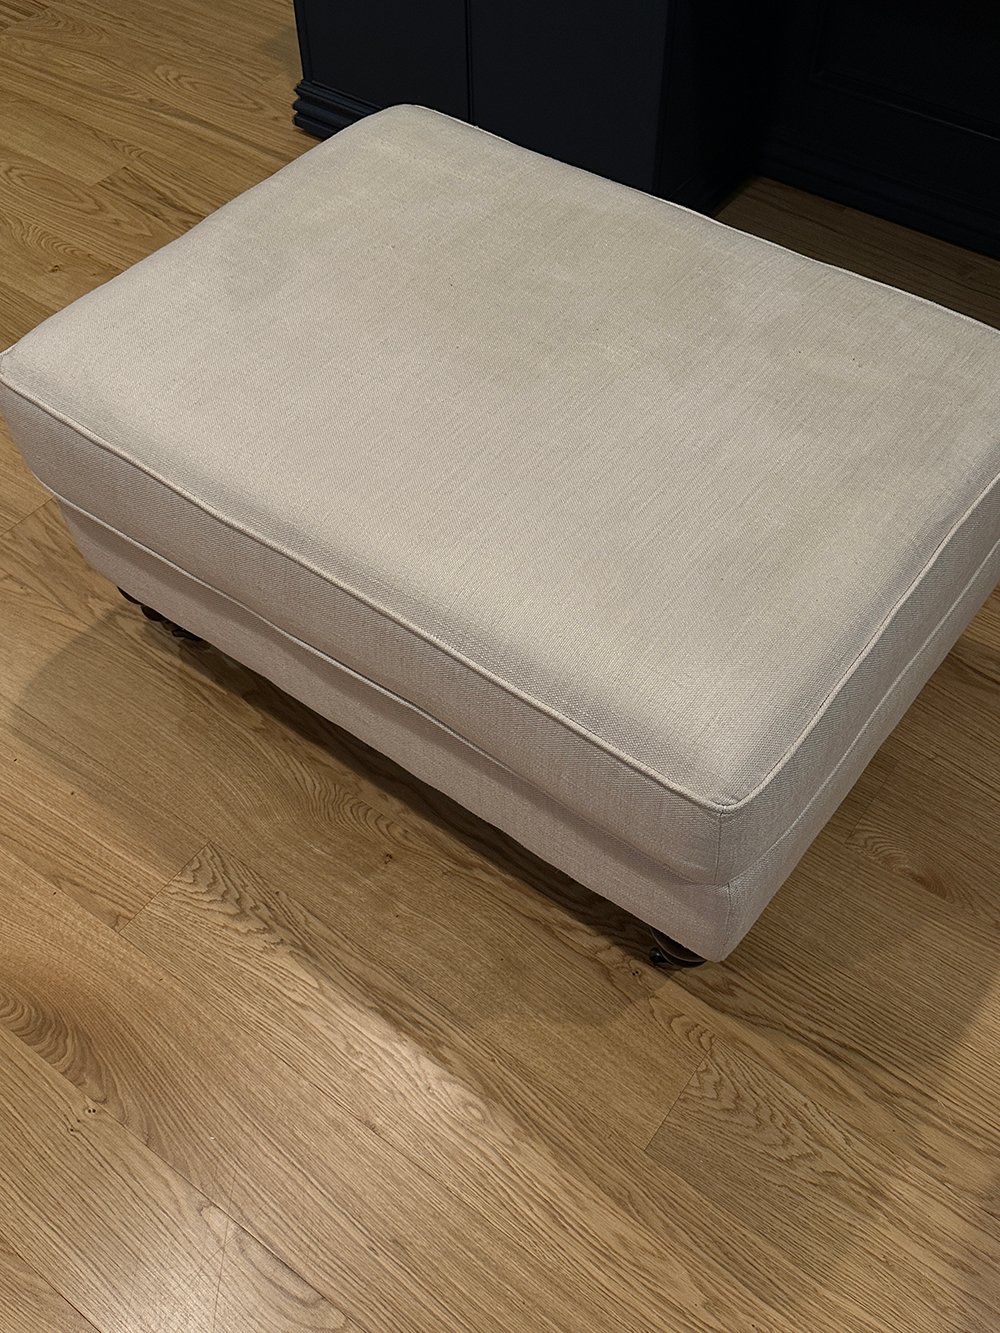 How to Make a Basic Ottoman Look Custom and High-End - roomfortuesday.com